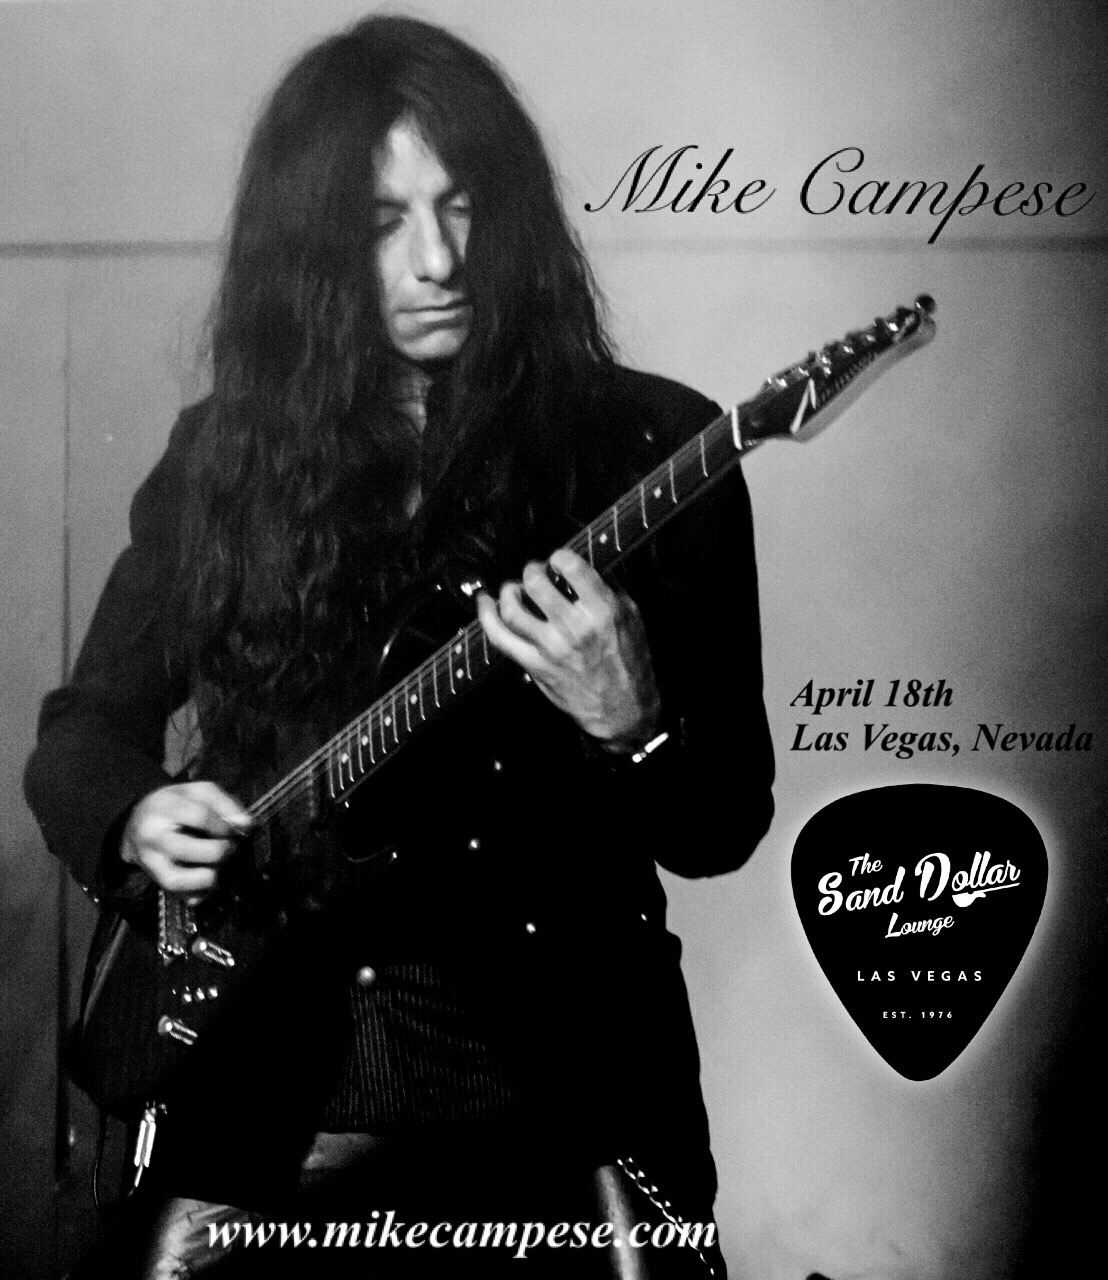 Mike Campese Las Vegas, The Sand Dollar Flyer 4/18/19.